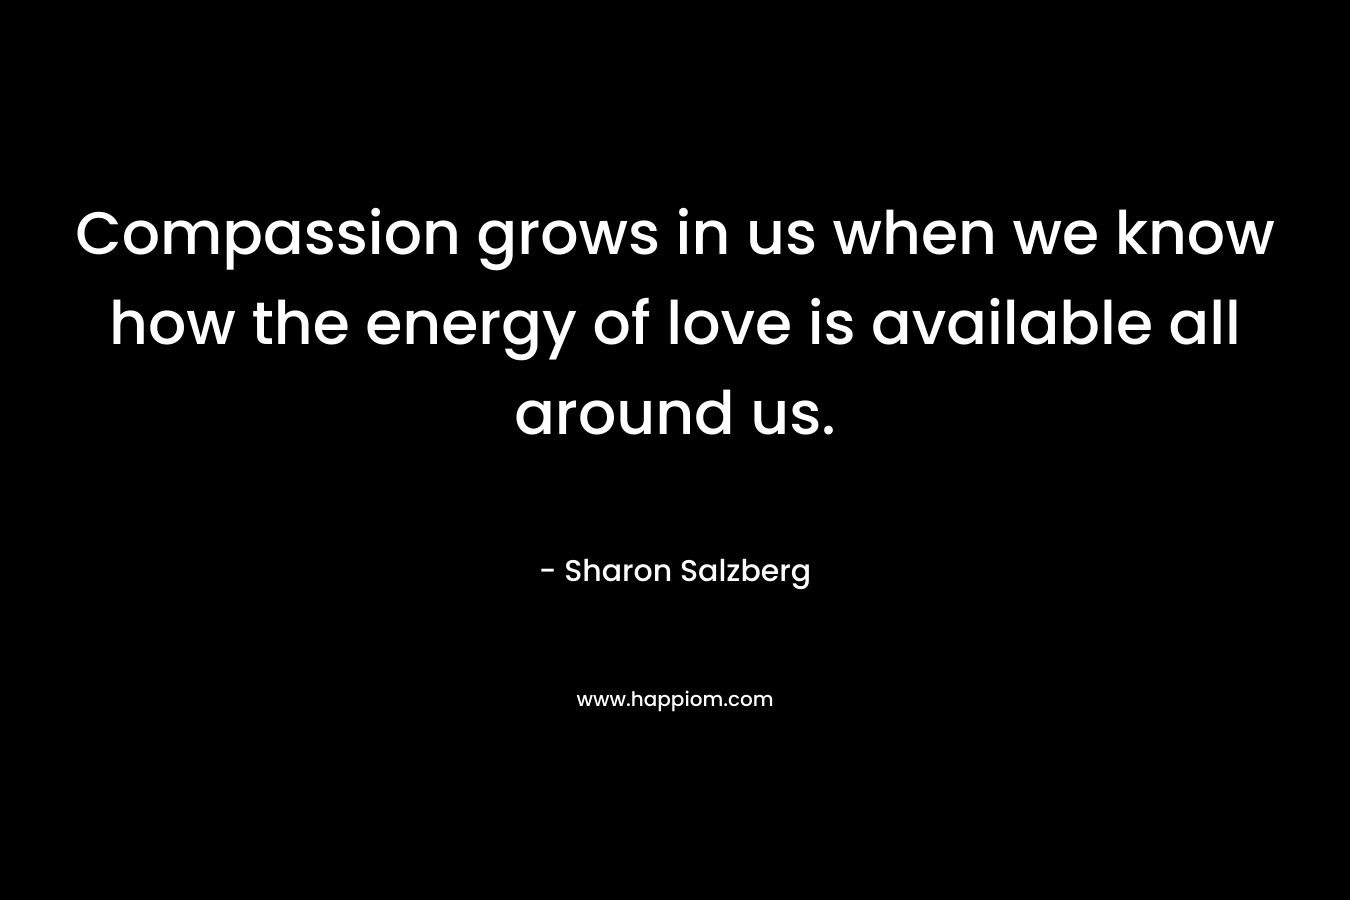 Compassion grows in us when we know how the energy of love is available all around us.